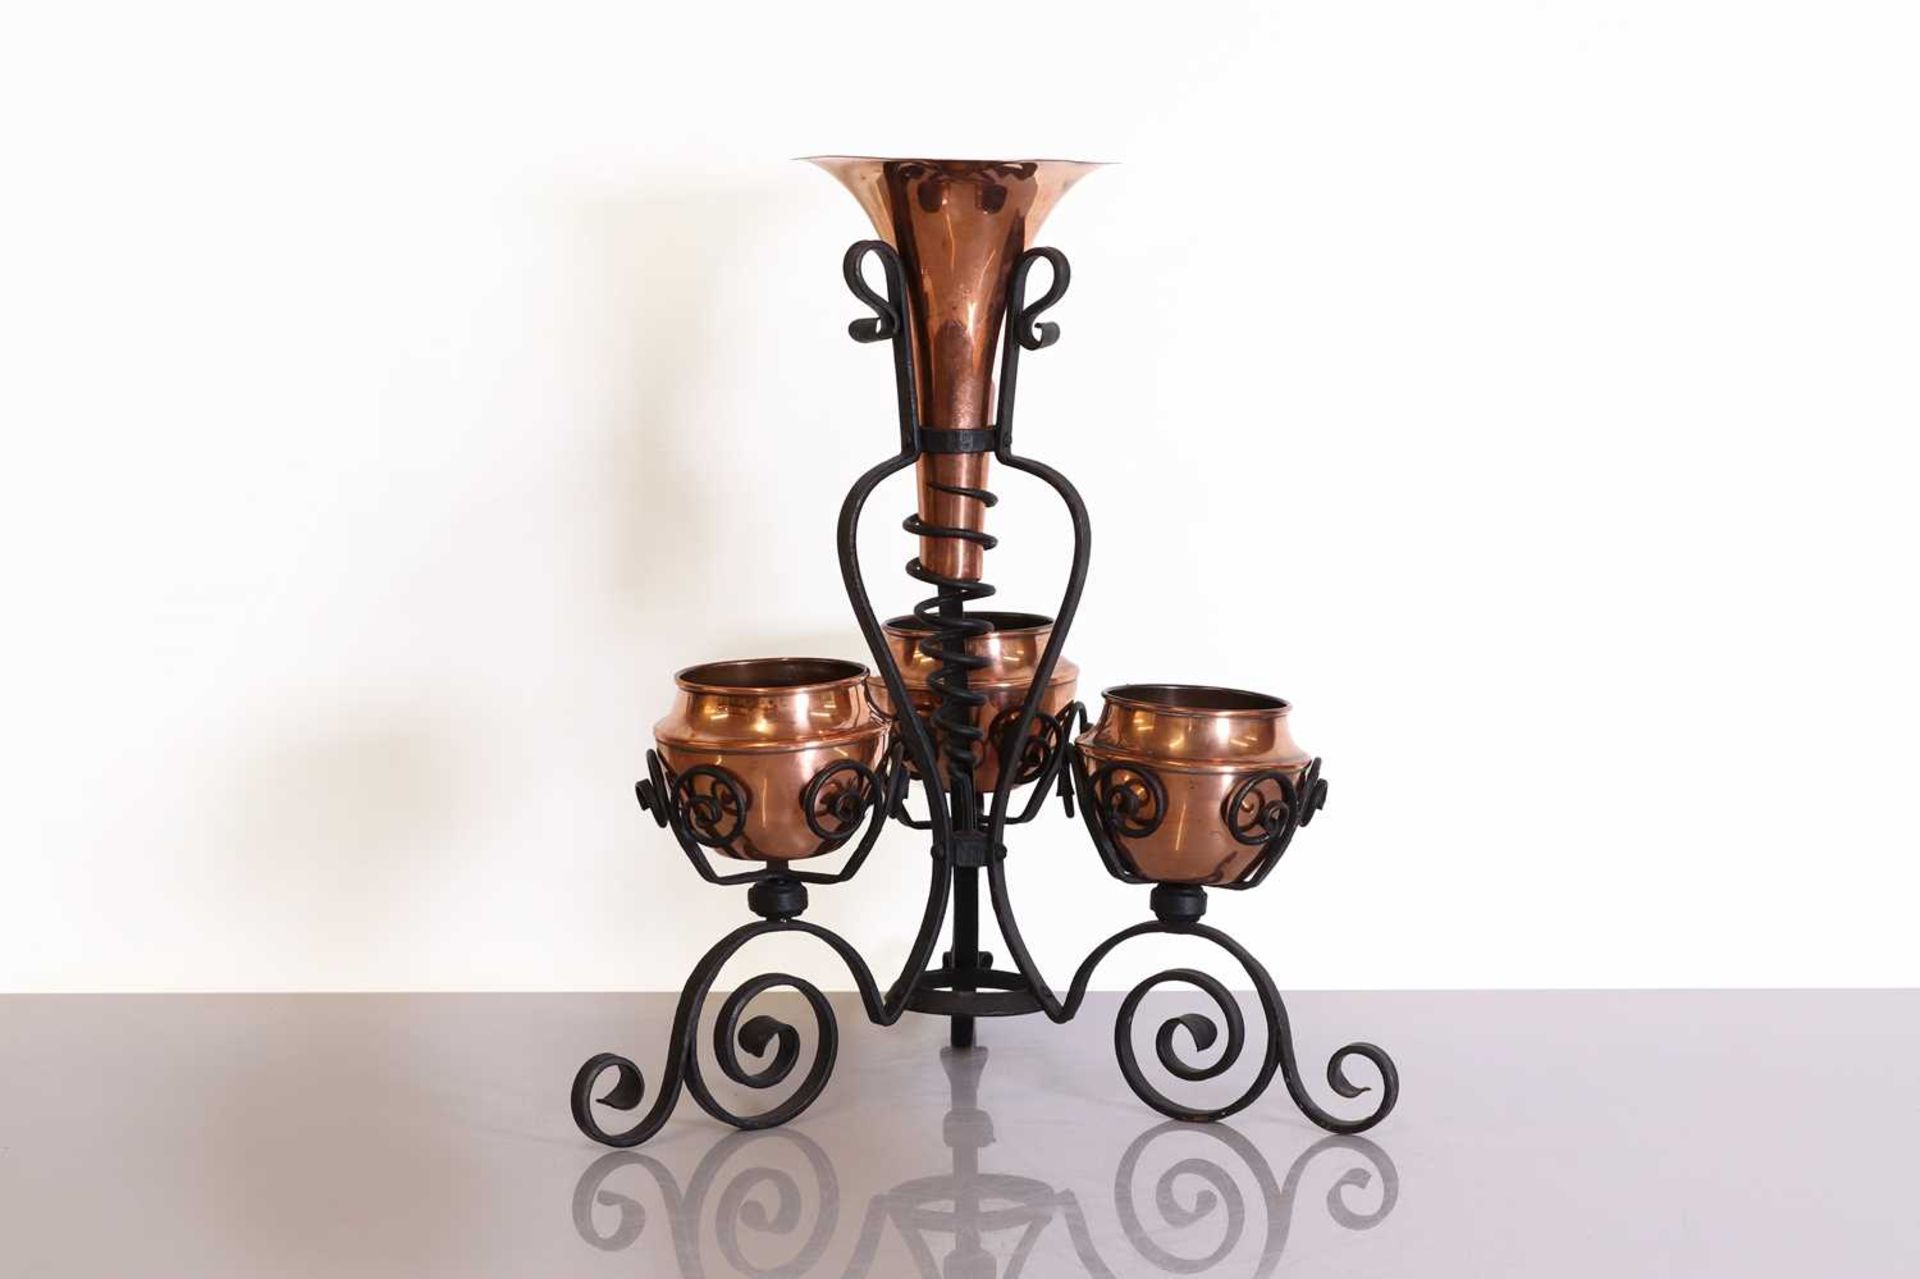 An Arts and Crafts copper and wrought-iron centrepiece,